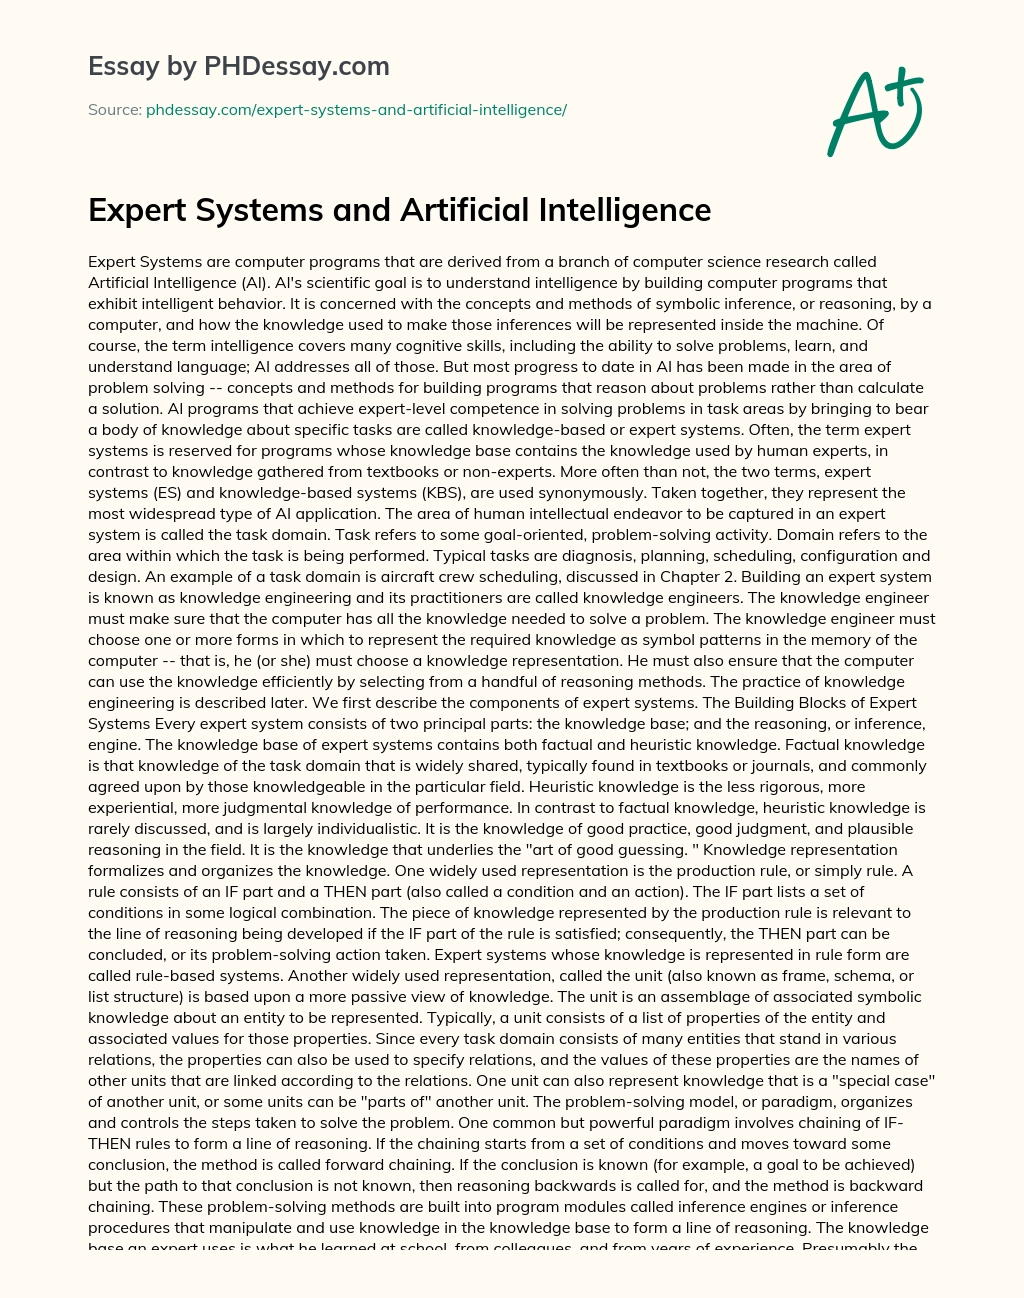 Expert Systems and Artificial Intelligence essay